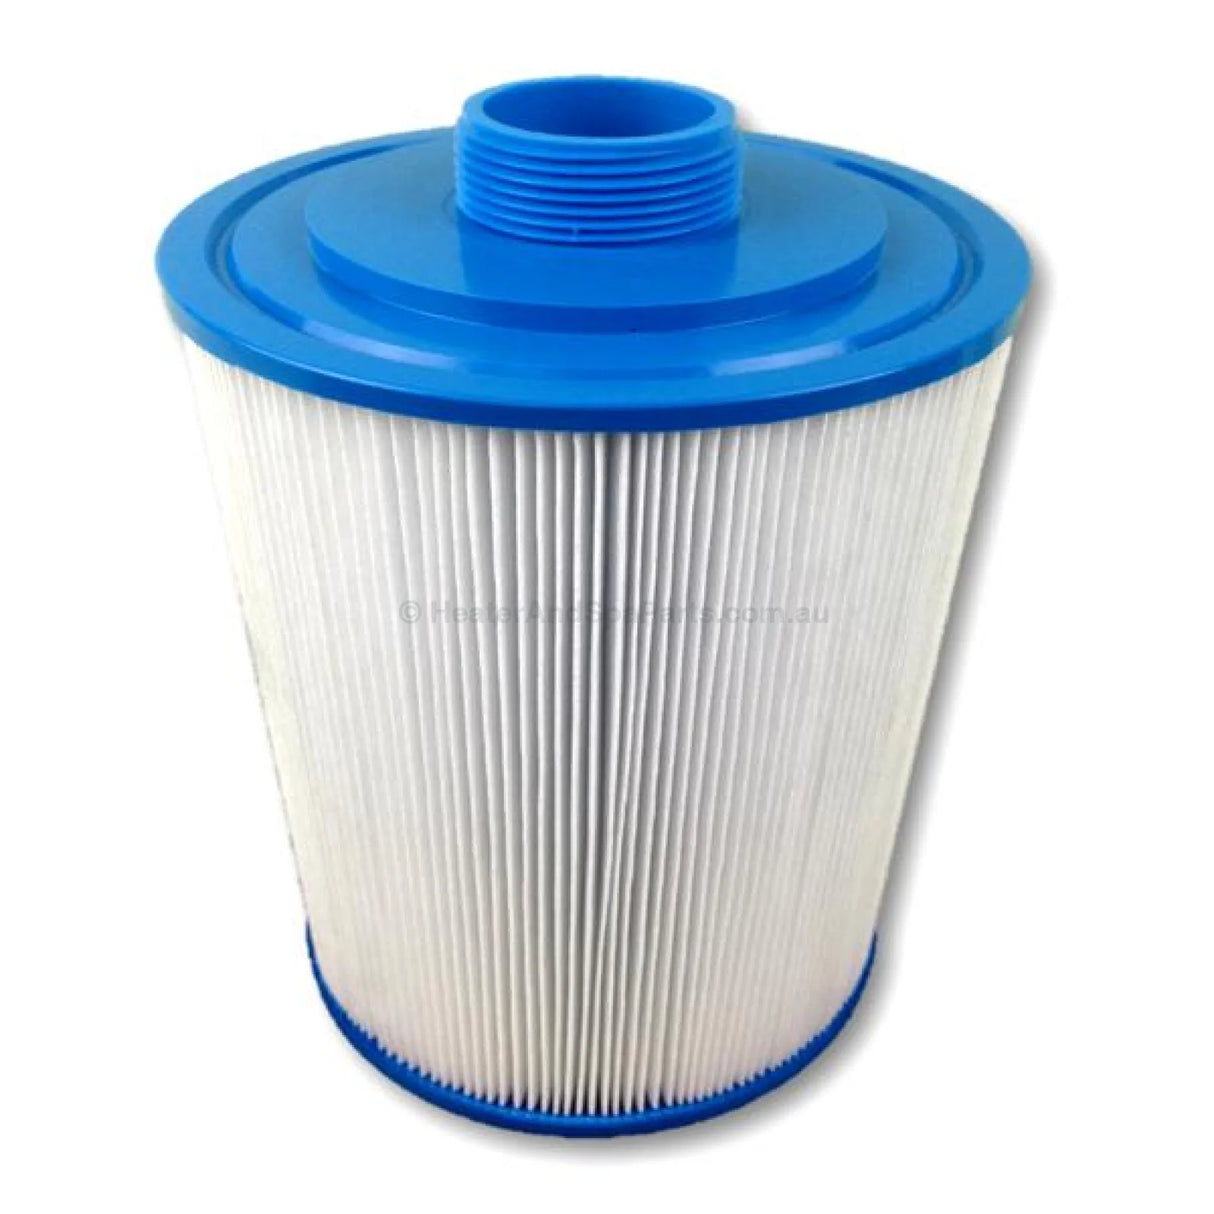 Monarch Spas 45ft² Spa Filter Cartridge - OEM - 200-210mm x 143-145mm - Heater and Spa Parts